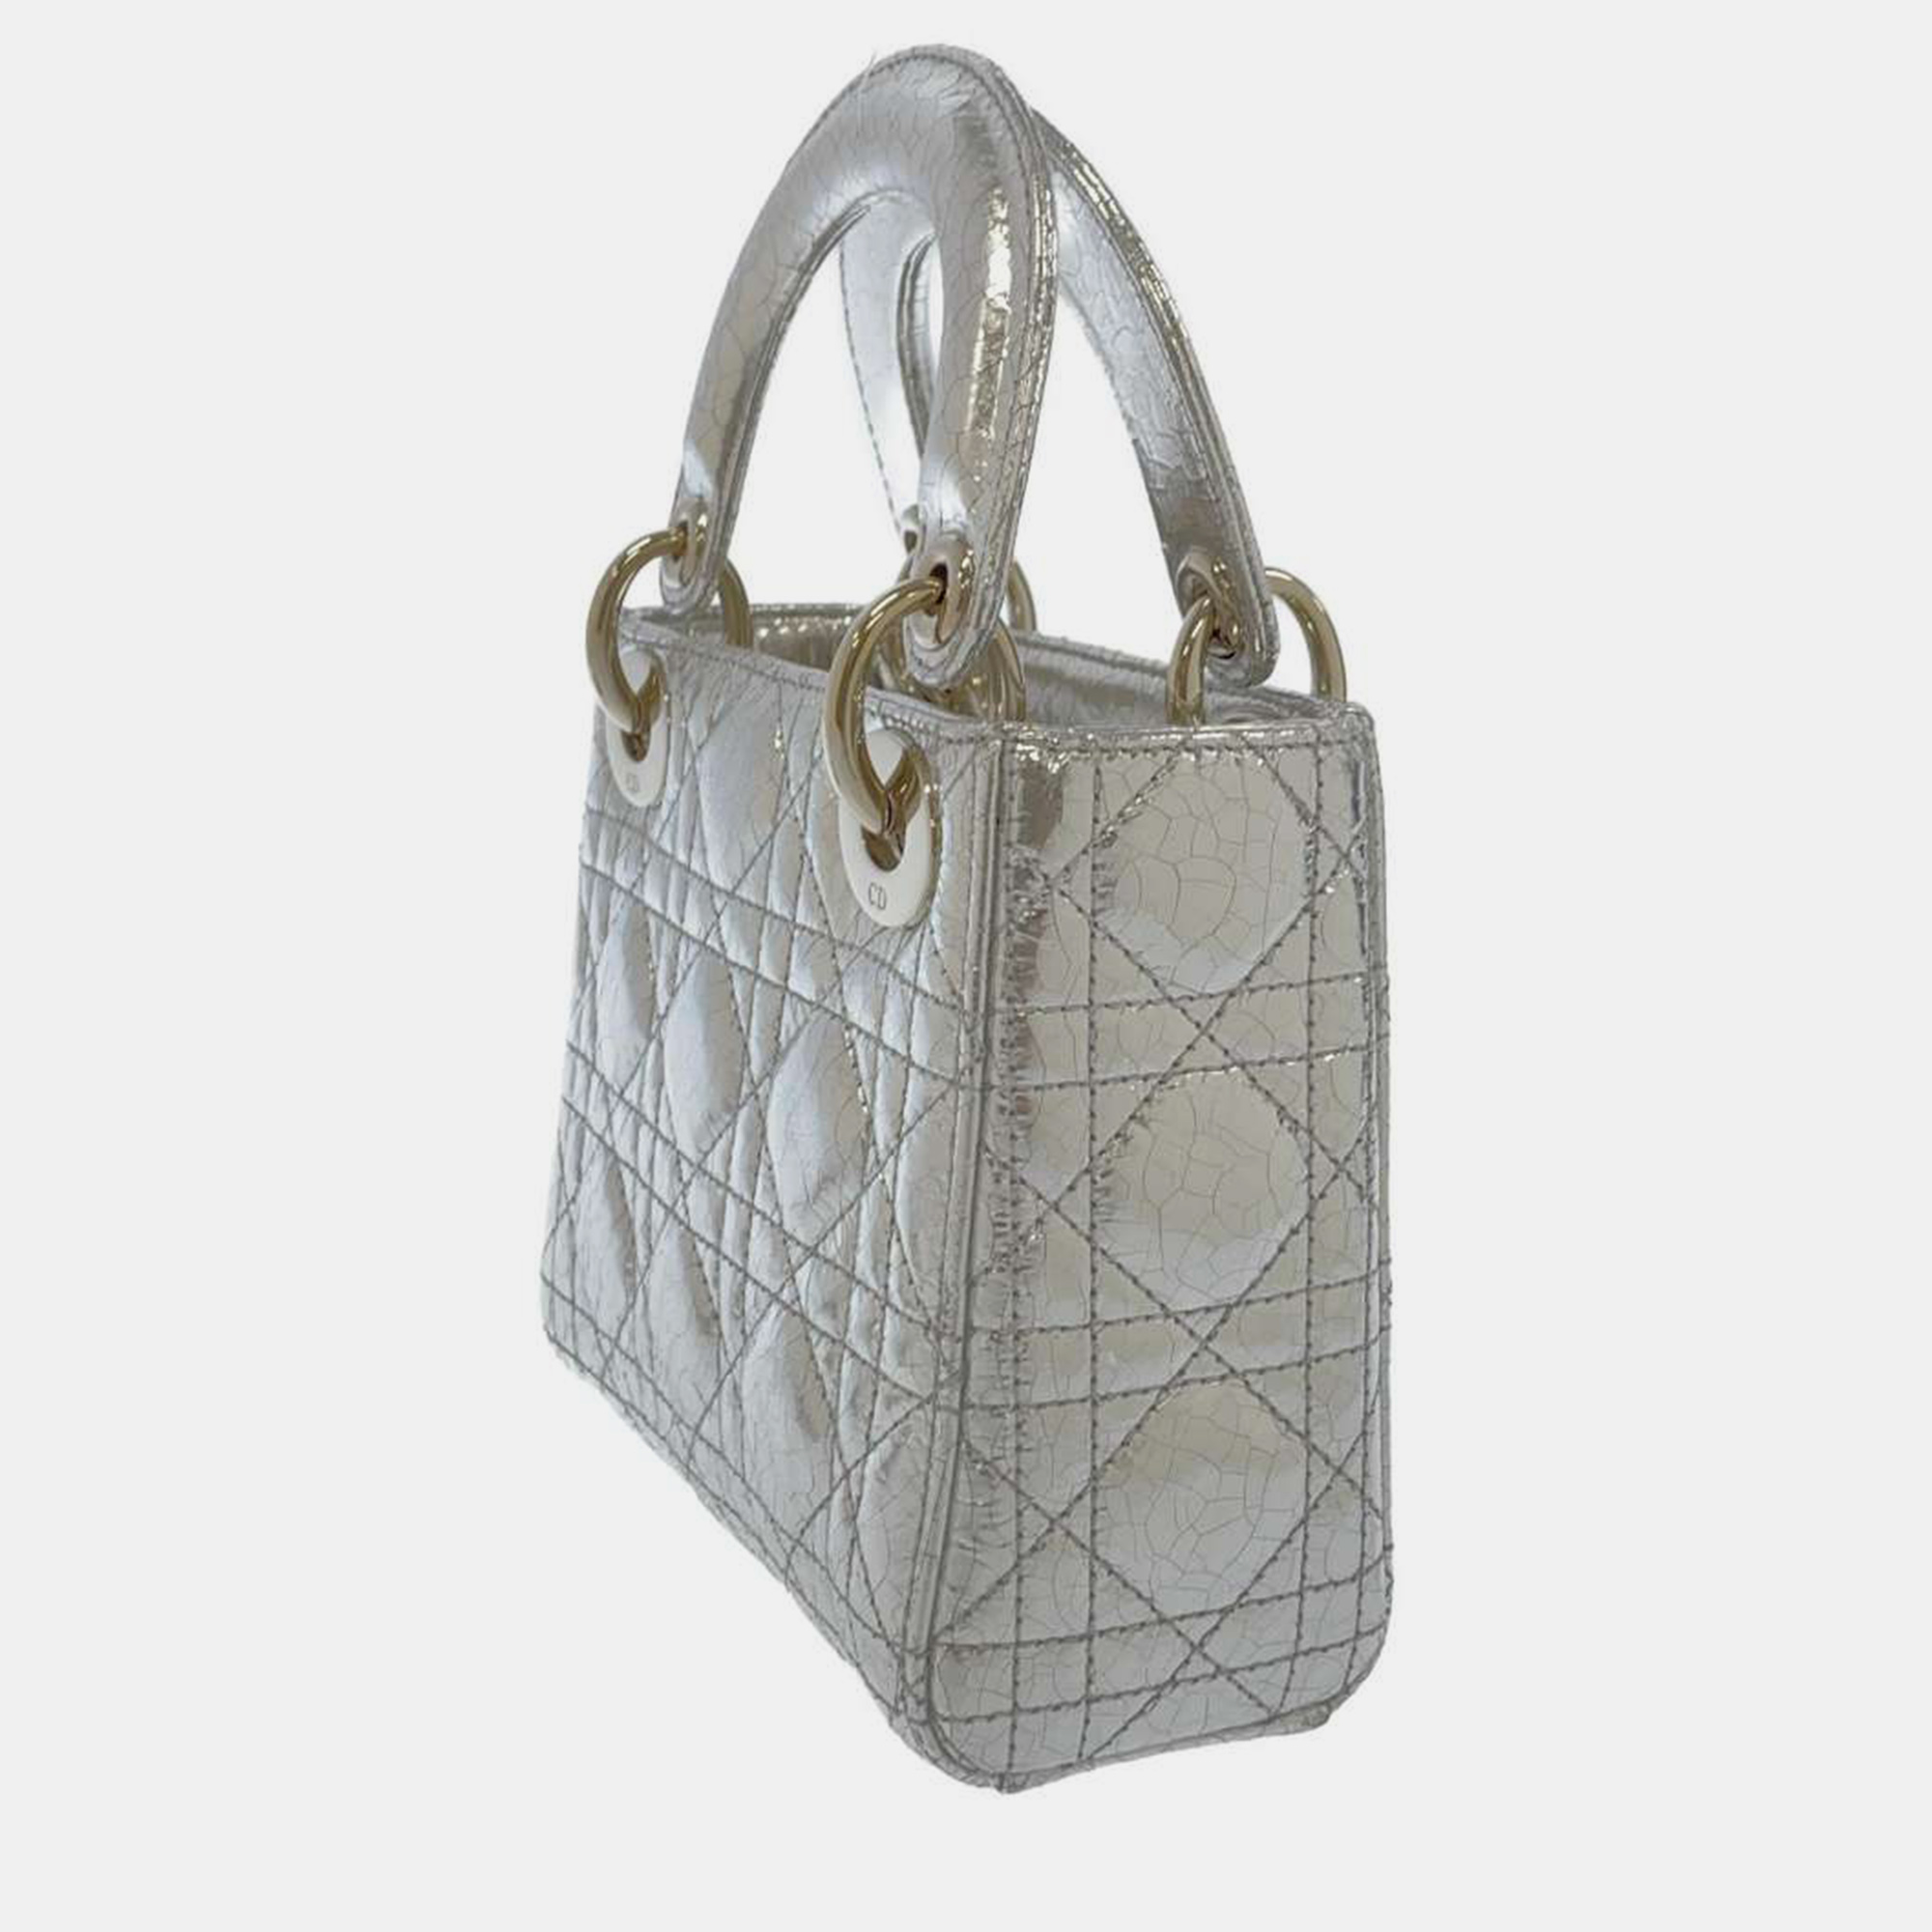 Dior Silver Leather Lady Dior Top Handle Bag